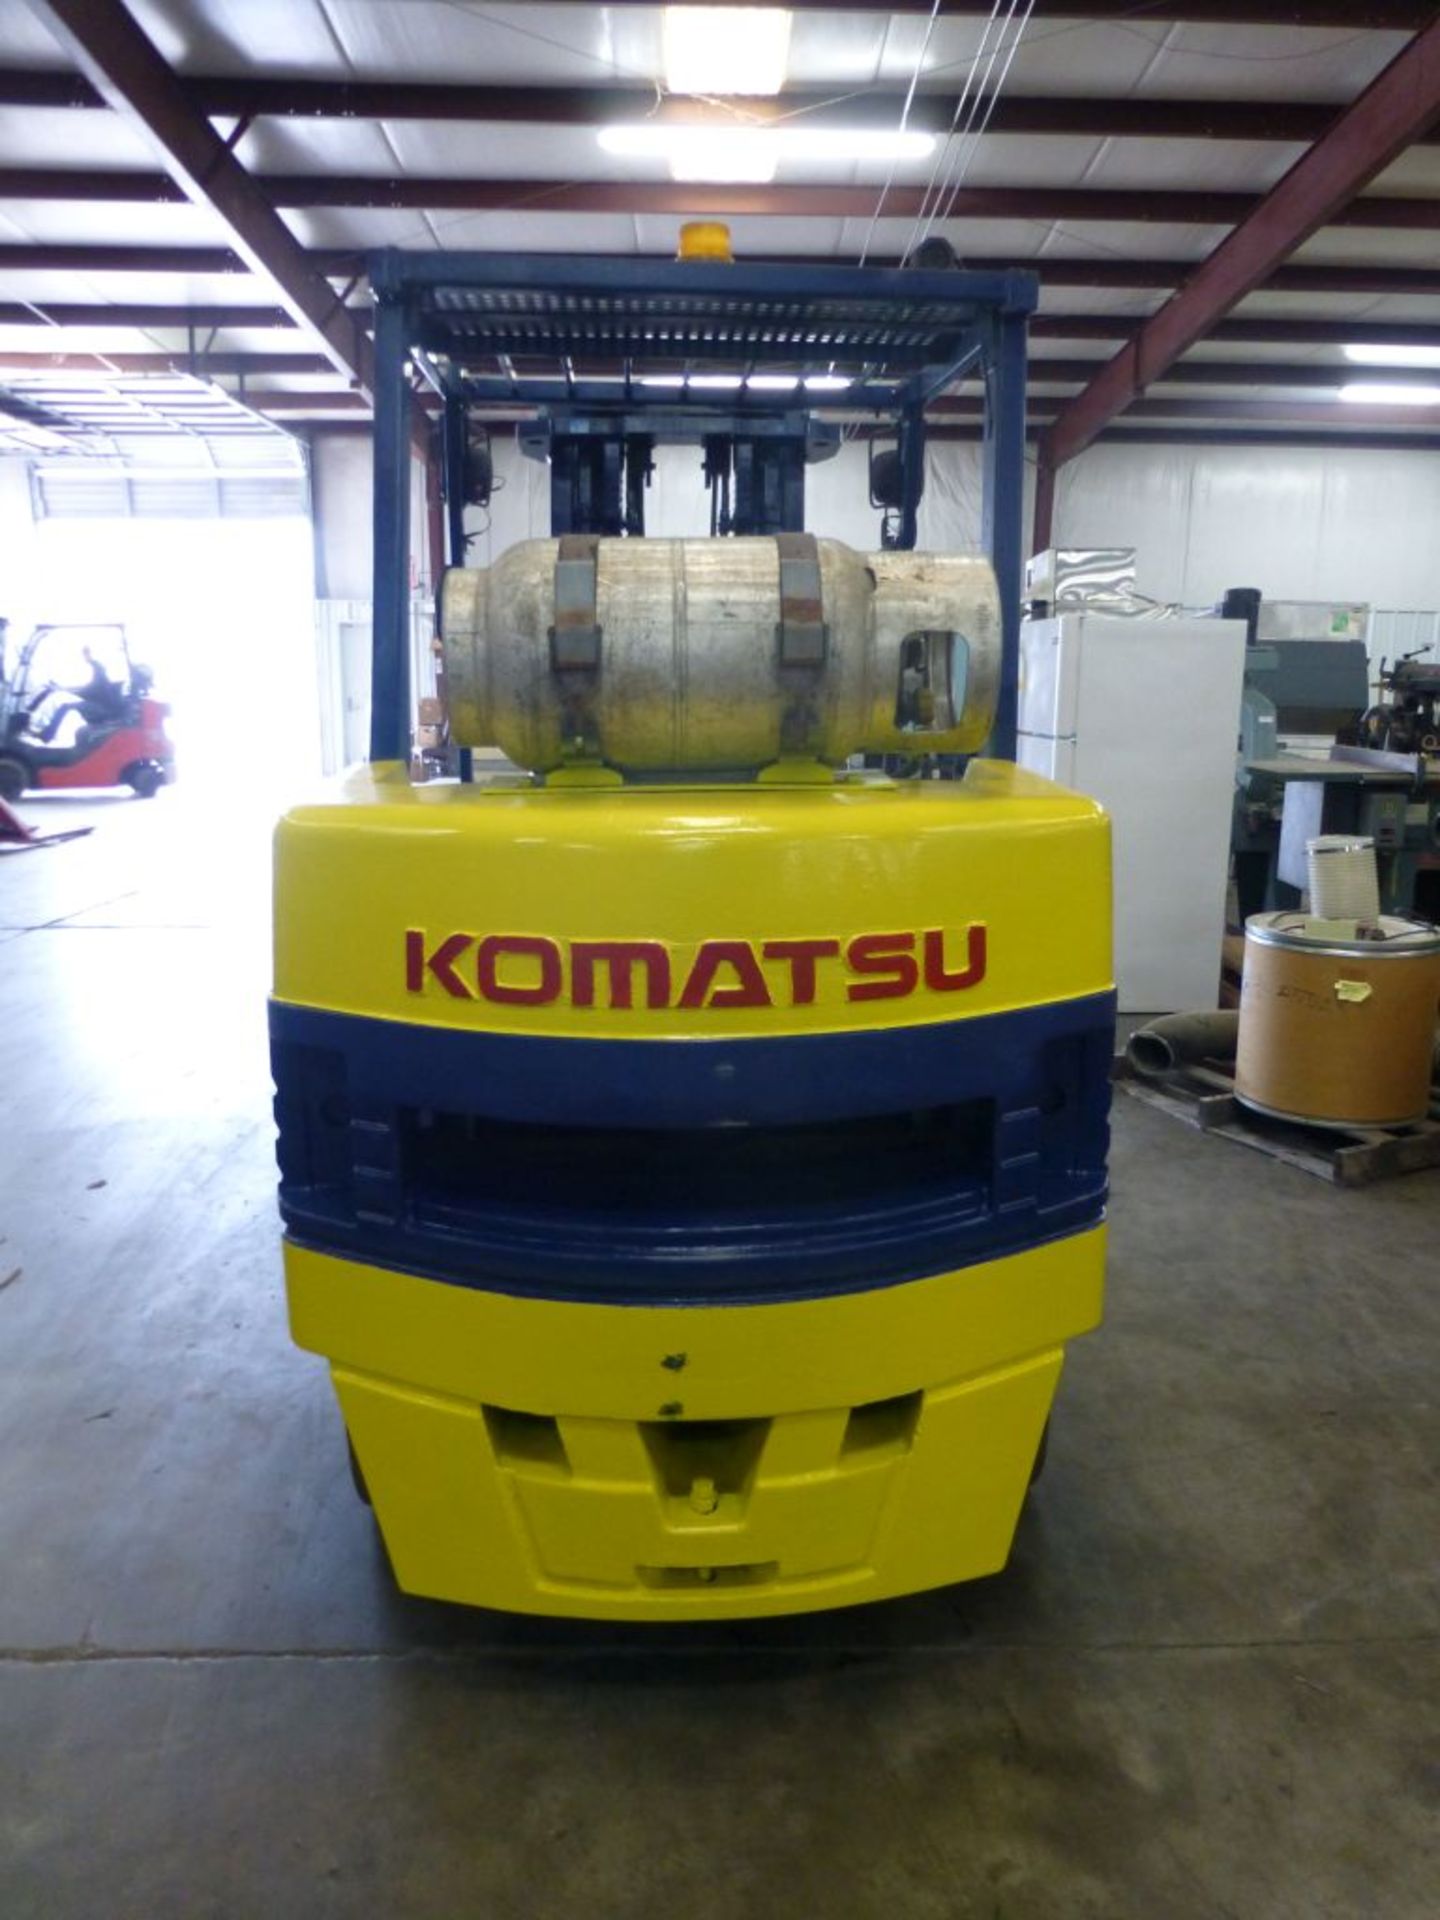 Komatsu Solid Tire Propane Forklift; Capacity: 8,830 lbs; Max Lift Height: 185":Model No. FG-45ST-6; - Image 6 of 19